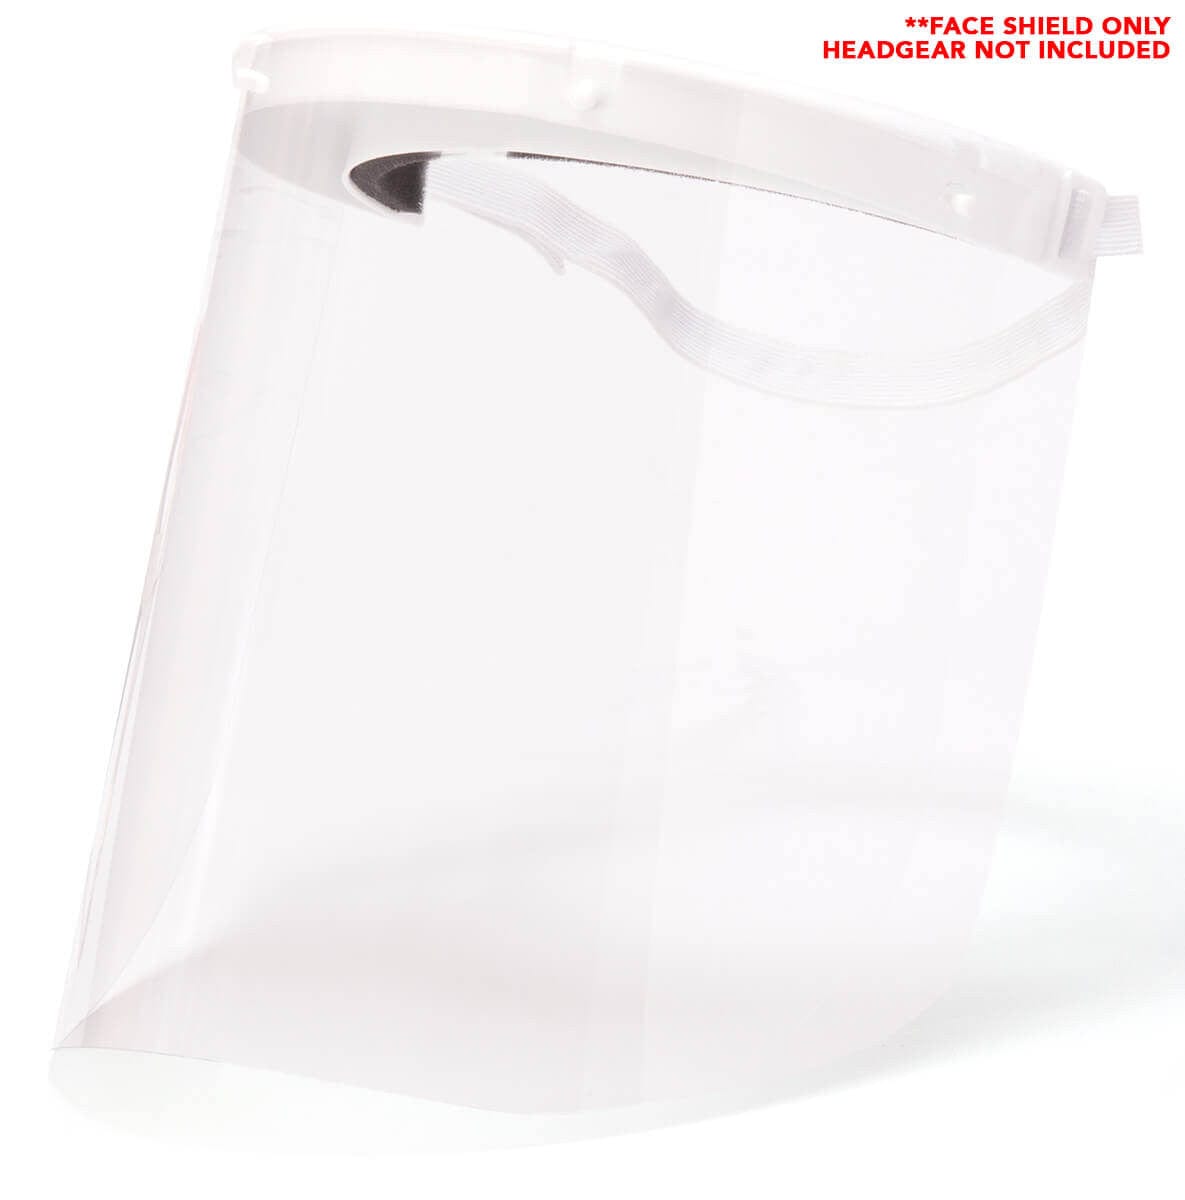 Pyramex S1000R Face Shield Replacements for S1000 - 20 Pack